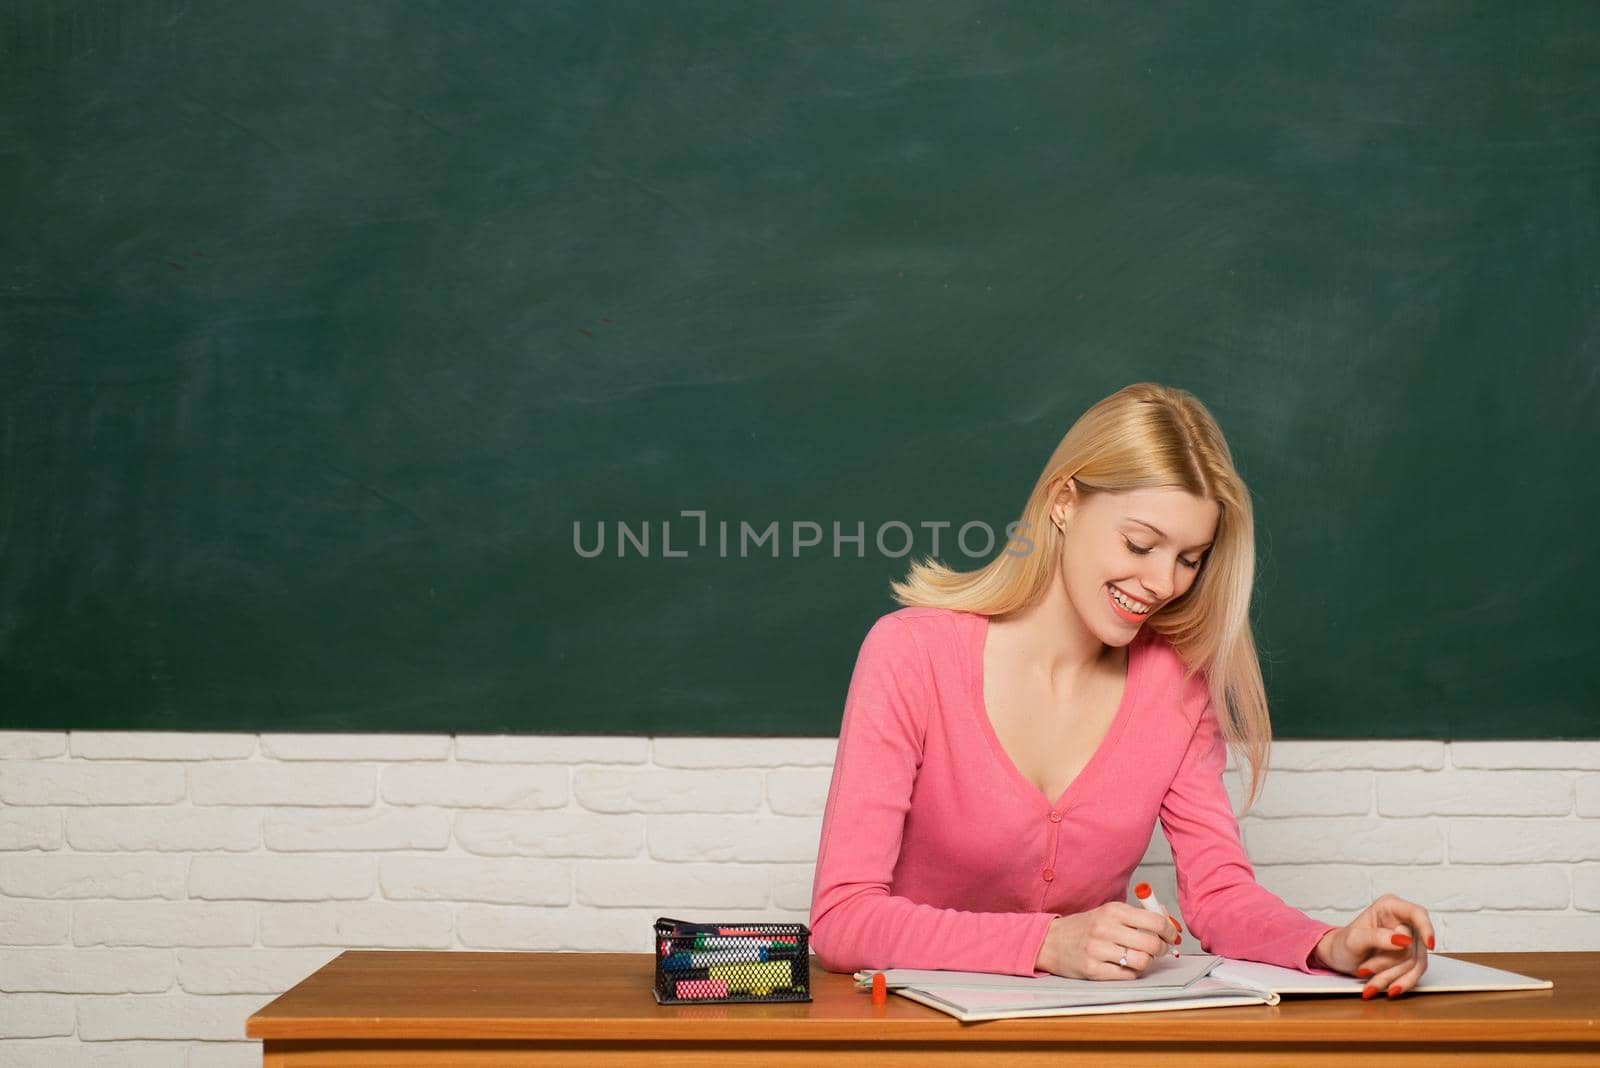 Girl adorable teacher sit classroom chalkboard background copy space. School education. Formal education. Woman student study with creativity and fresh ideas. College education. Education concept.